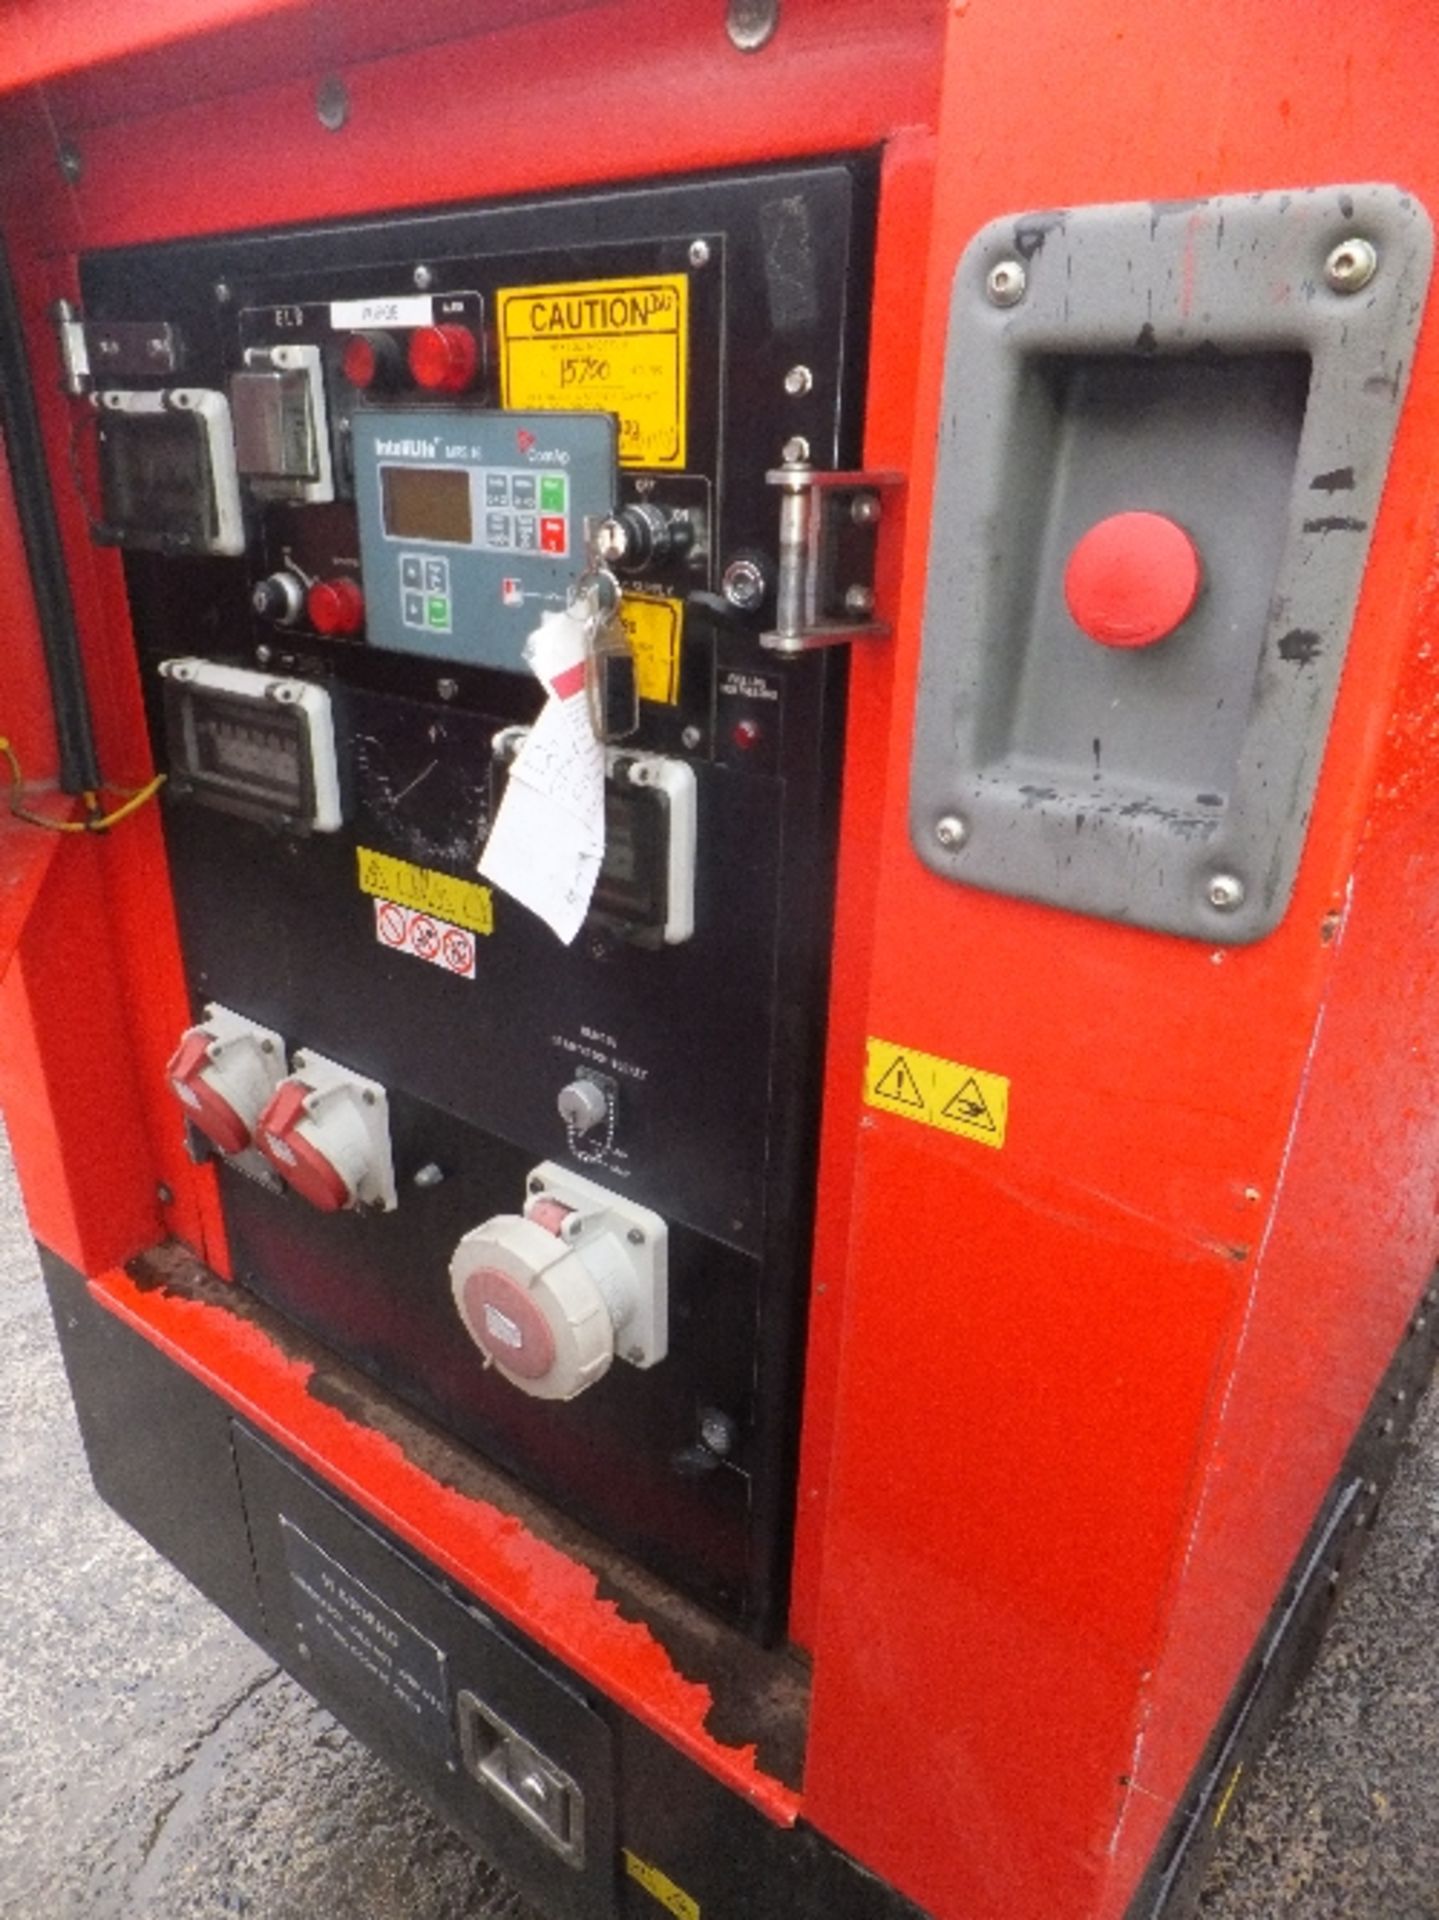 Genset MG50SSP generator 15838 hrs - fuel leak This lot is sold on instruction of Speedy - Image 2 of 5